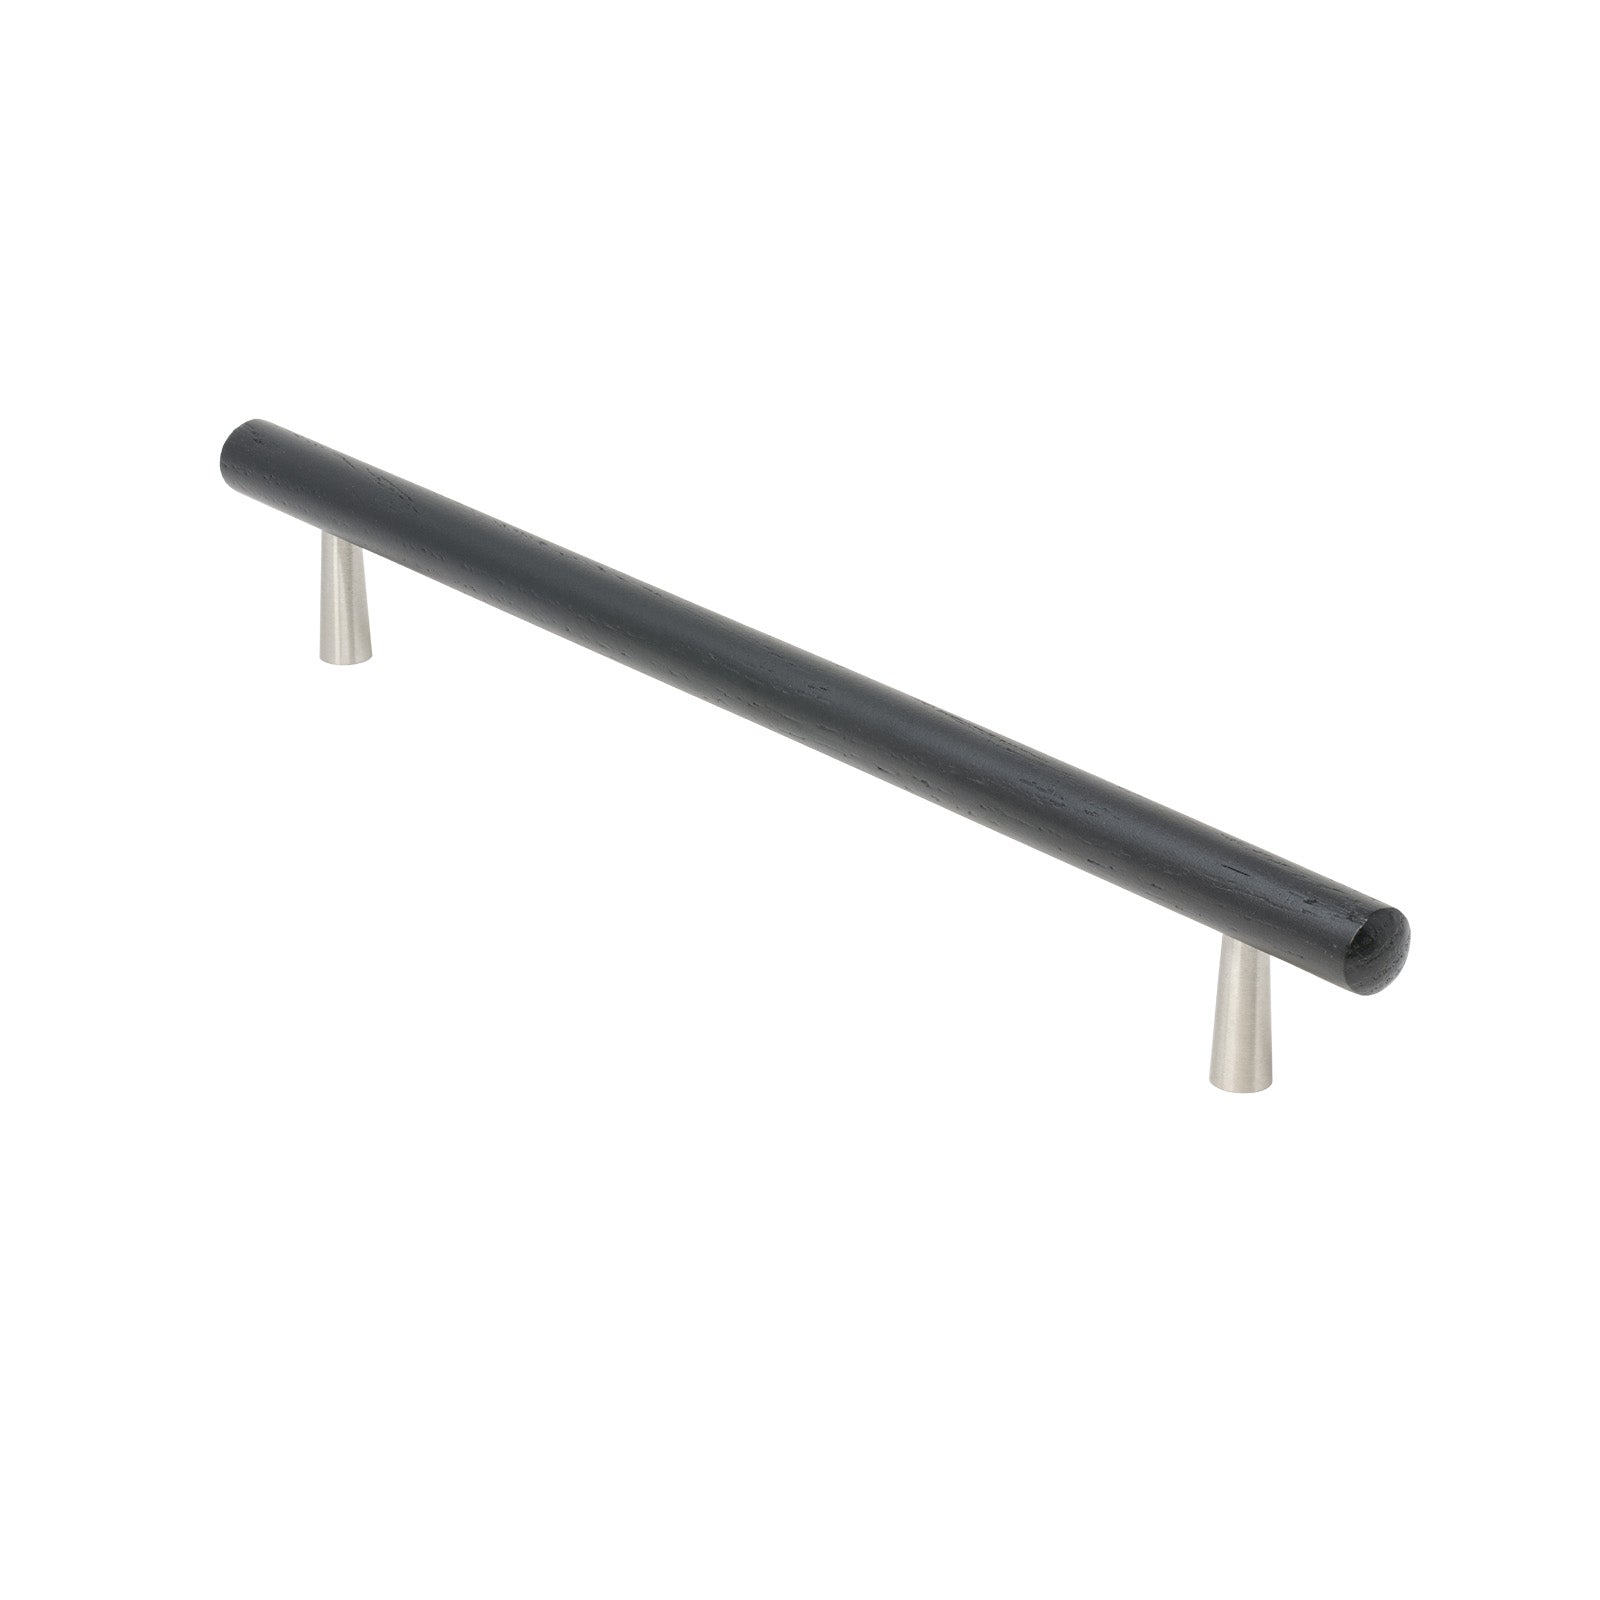 SHOW 224mm T-Bar Tilaa Cabinet Pull Handle In Ash Finish